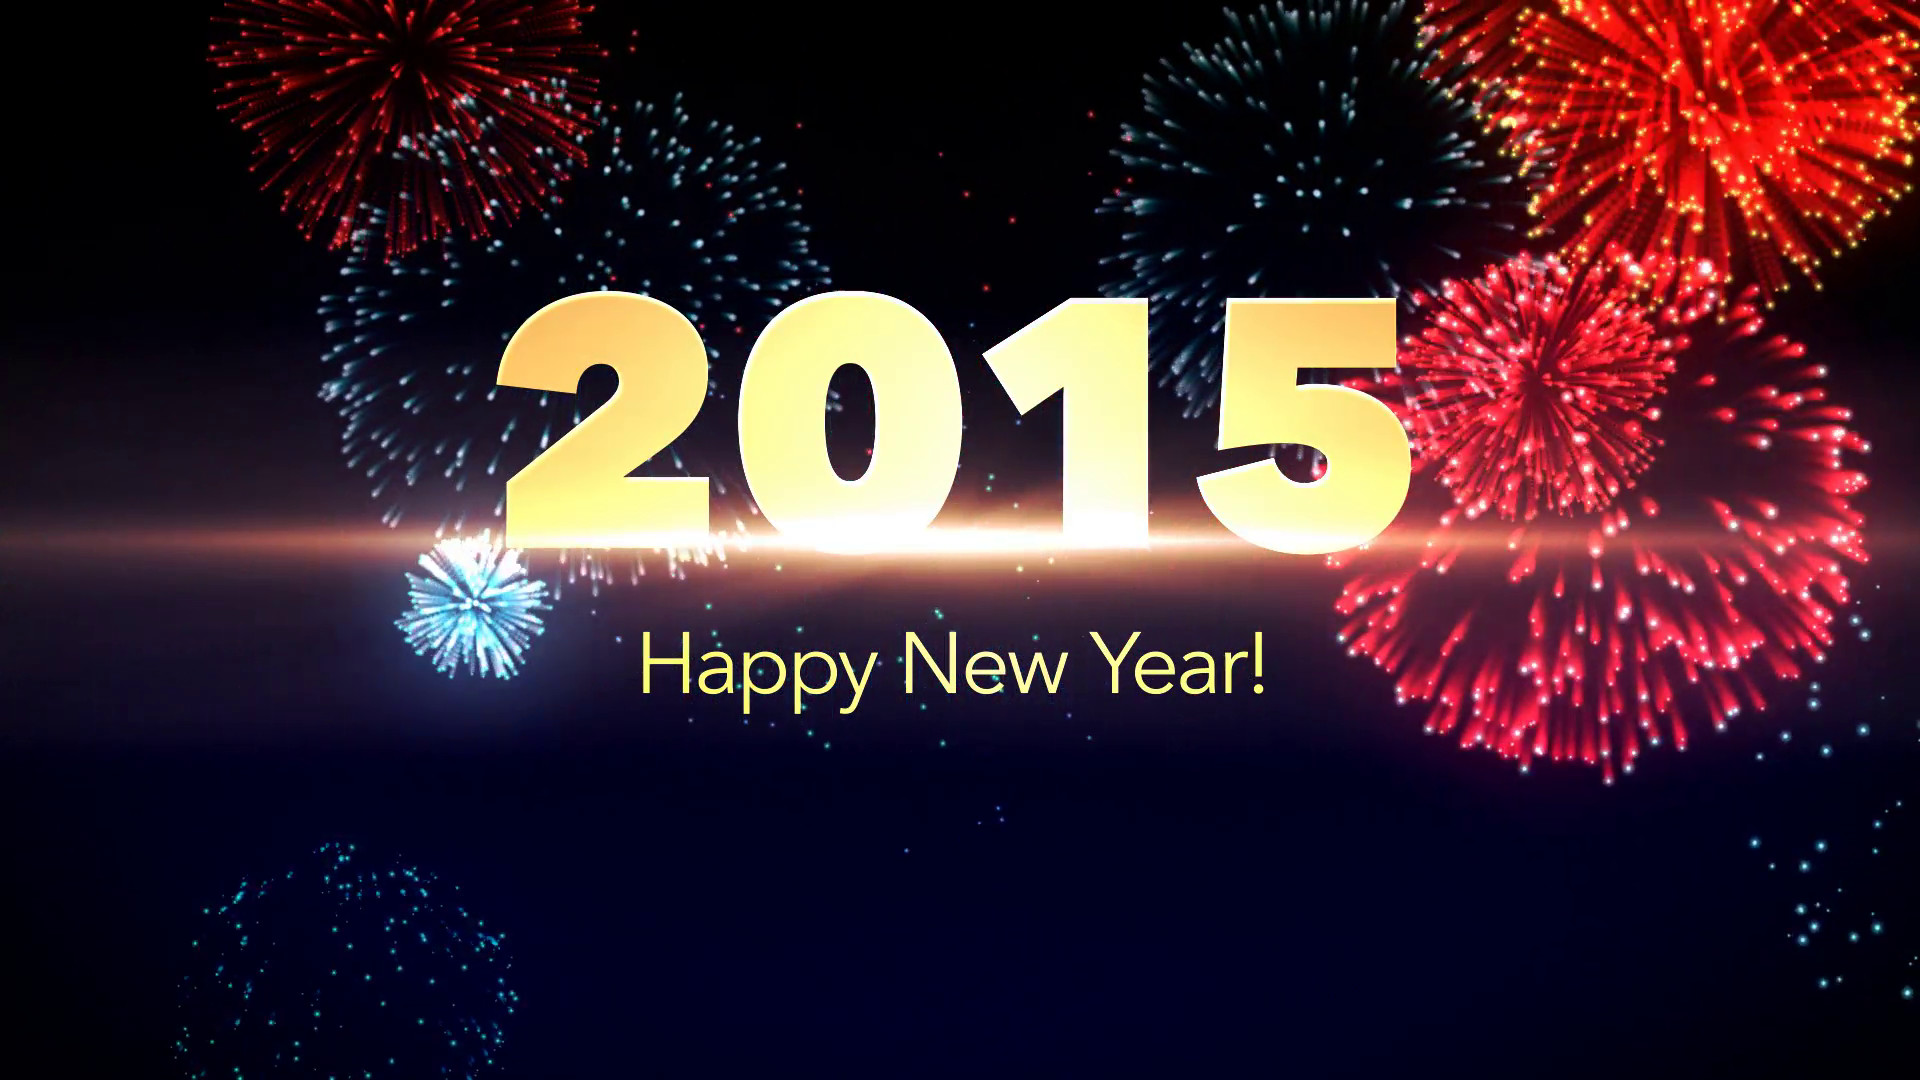 Subscription Library Happy New Year 2015 Background with Fireworks